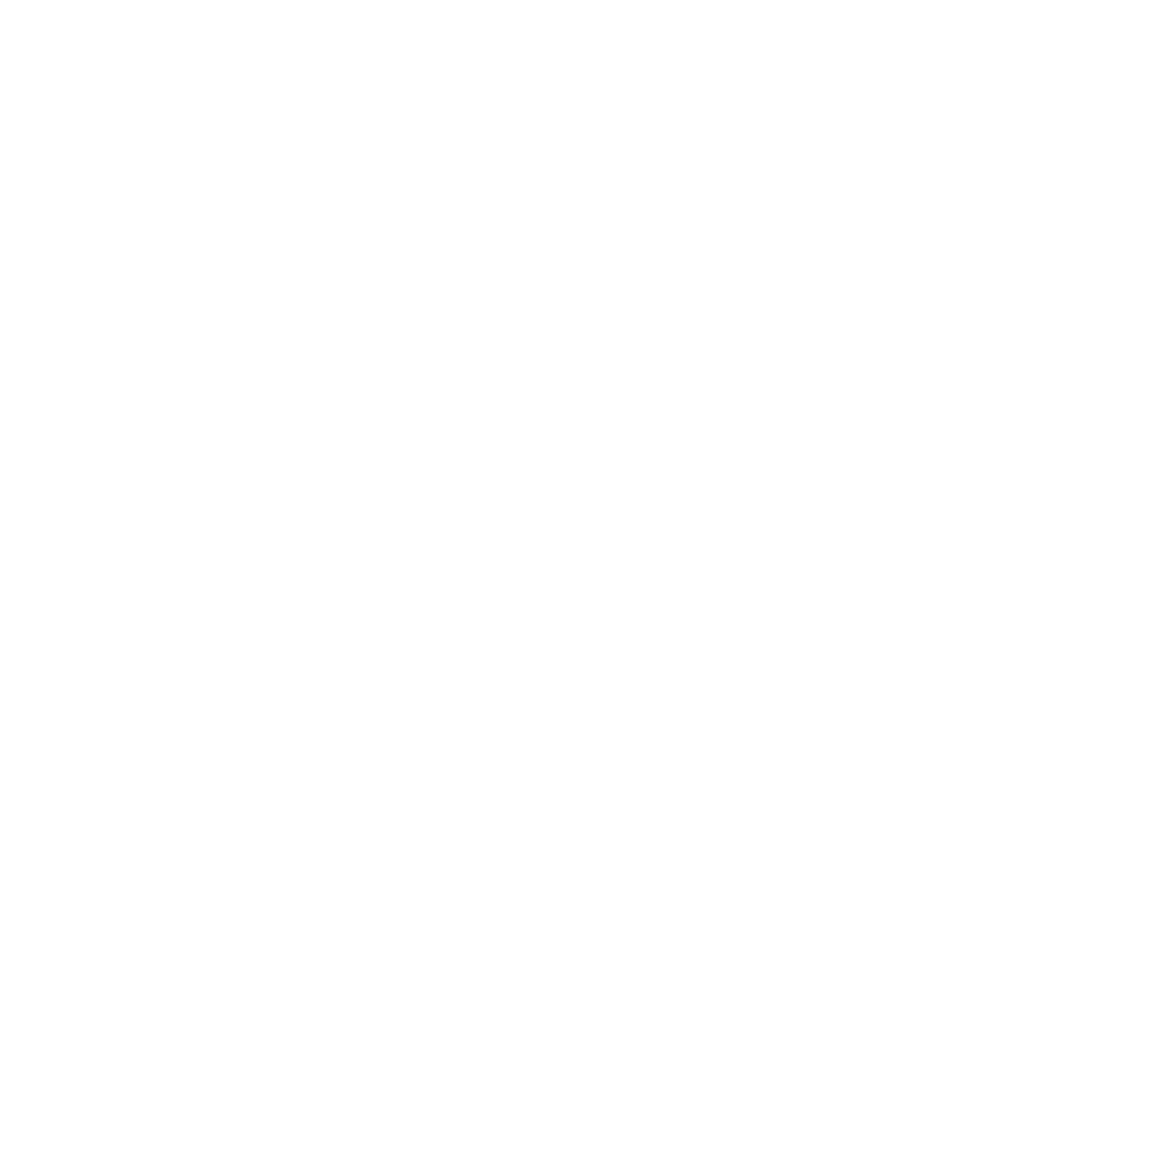 ComplyCube is UK DIATF certified